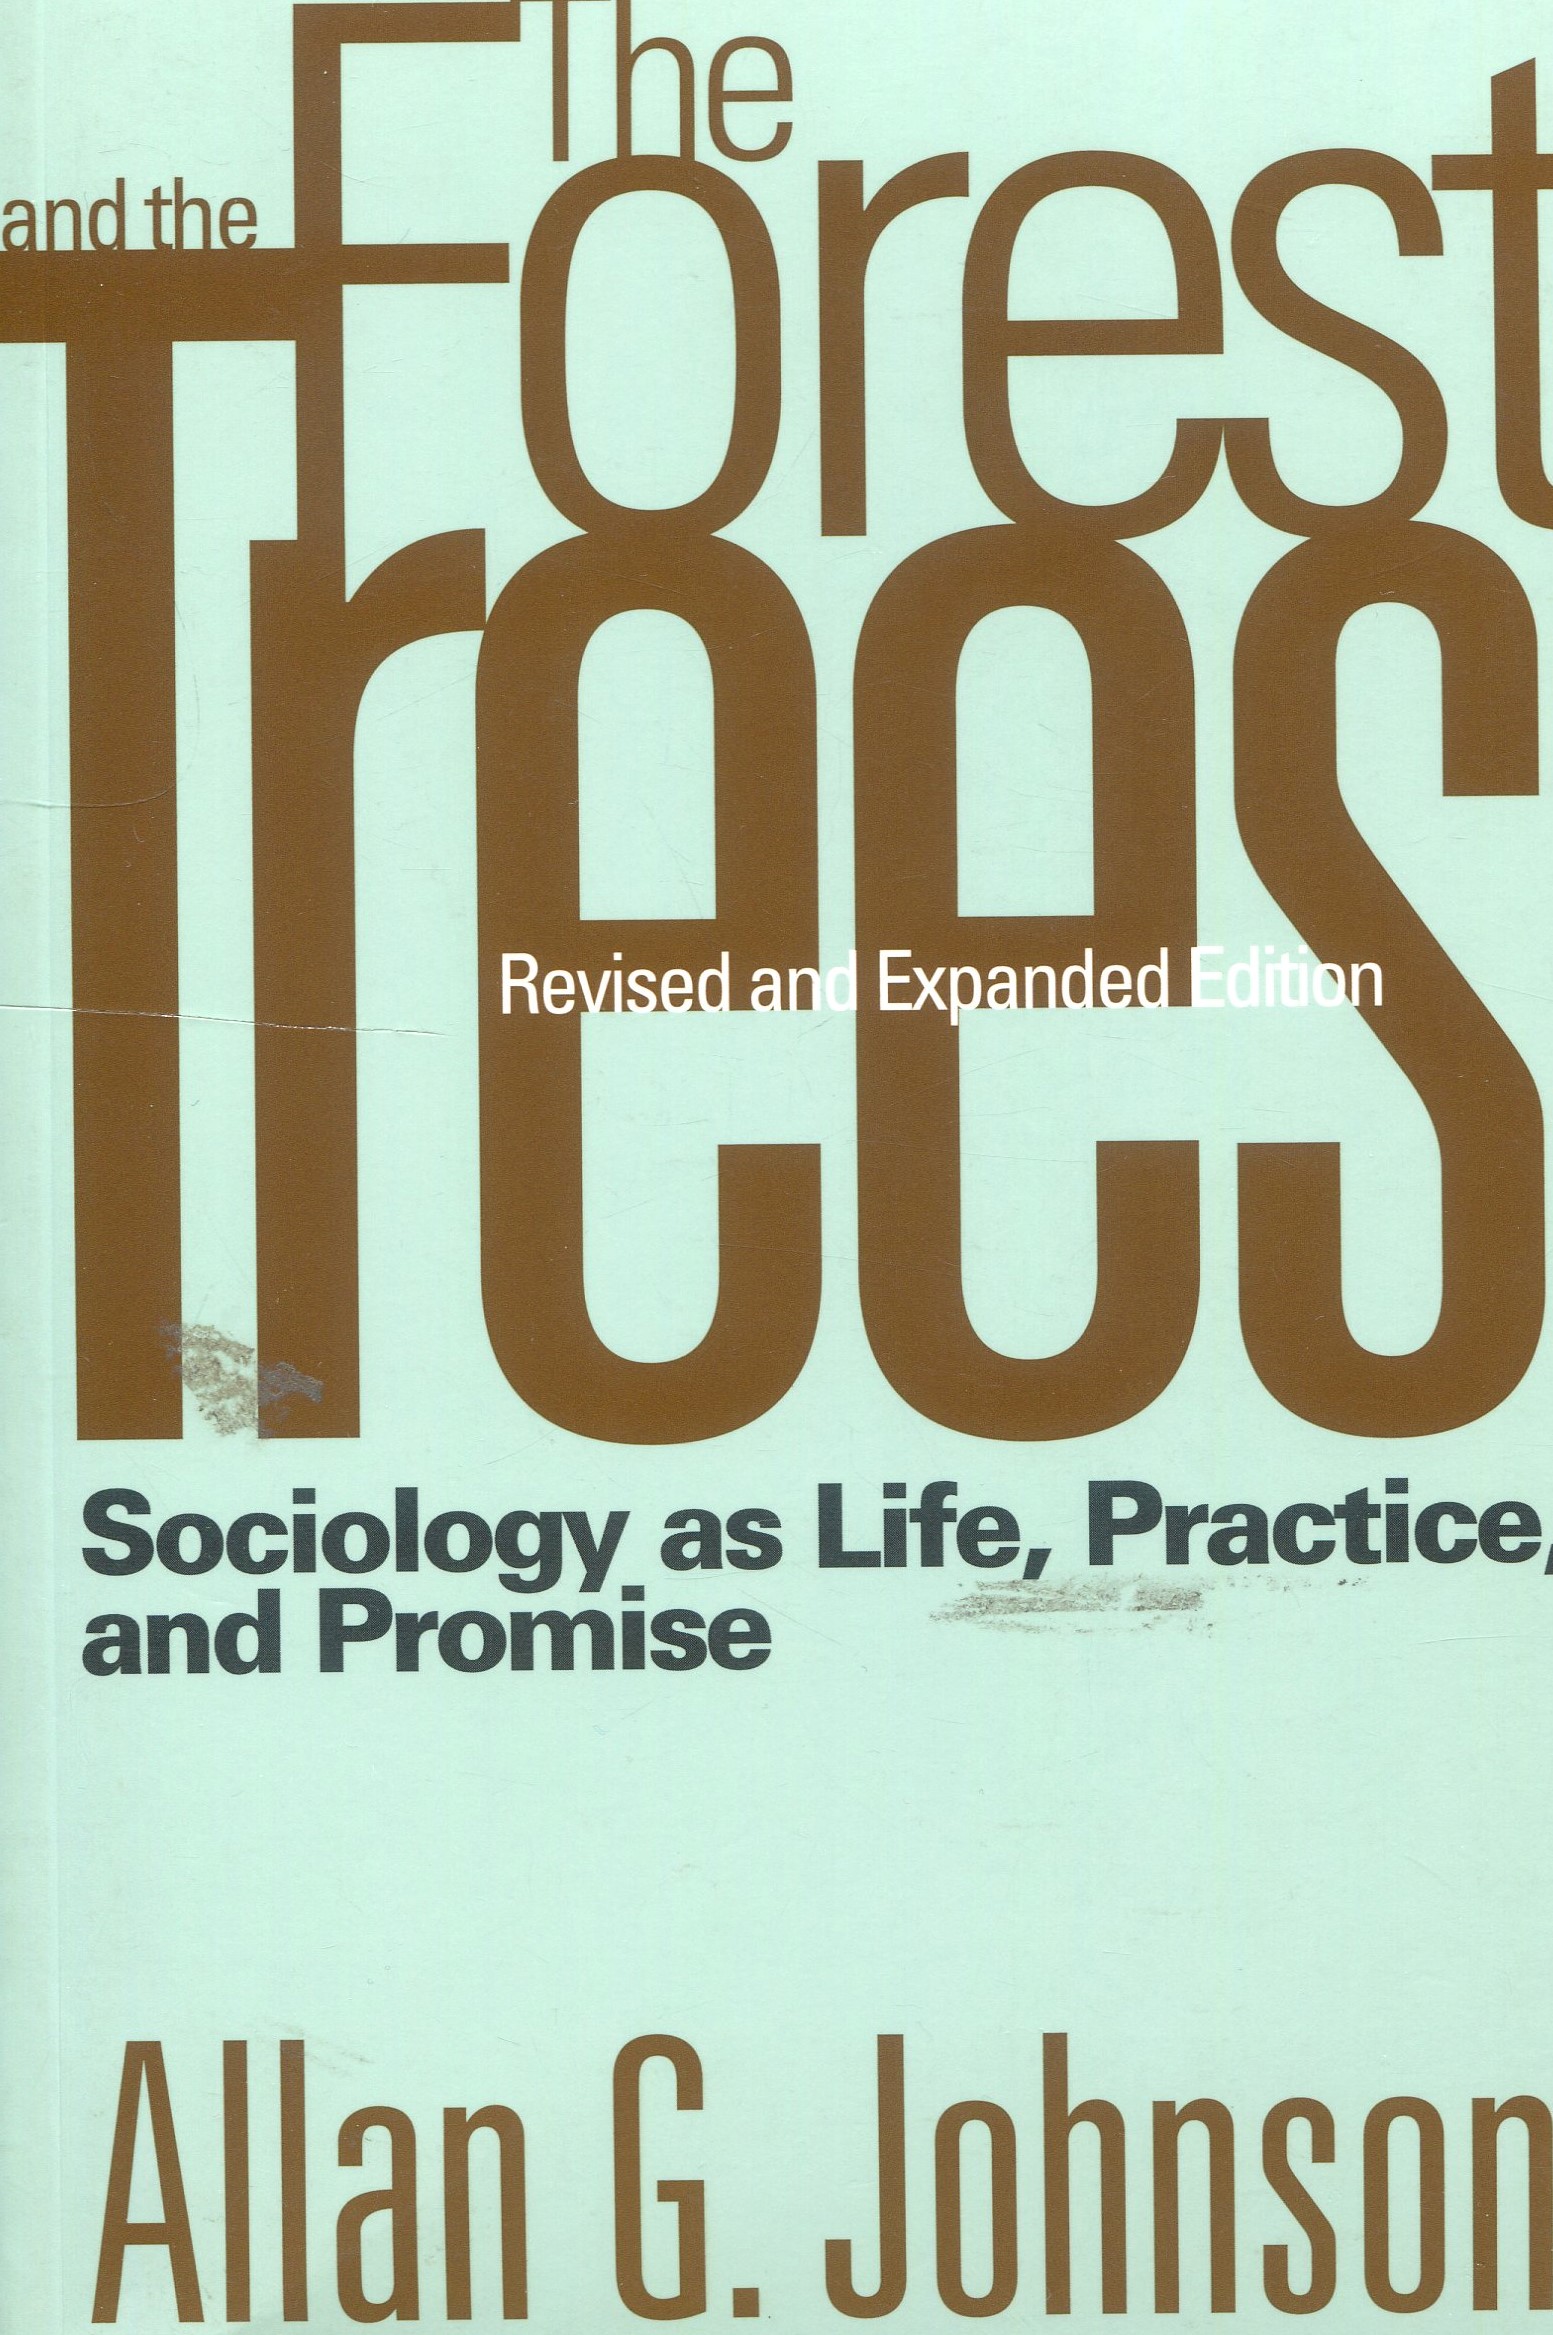 Forest and Trees. Sociology as Life, Practice, and Promise 9781592138760